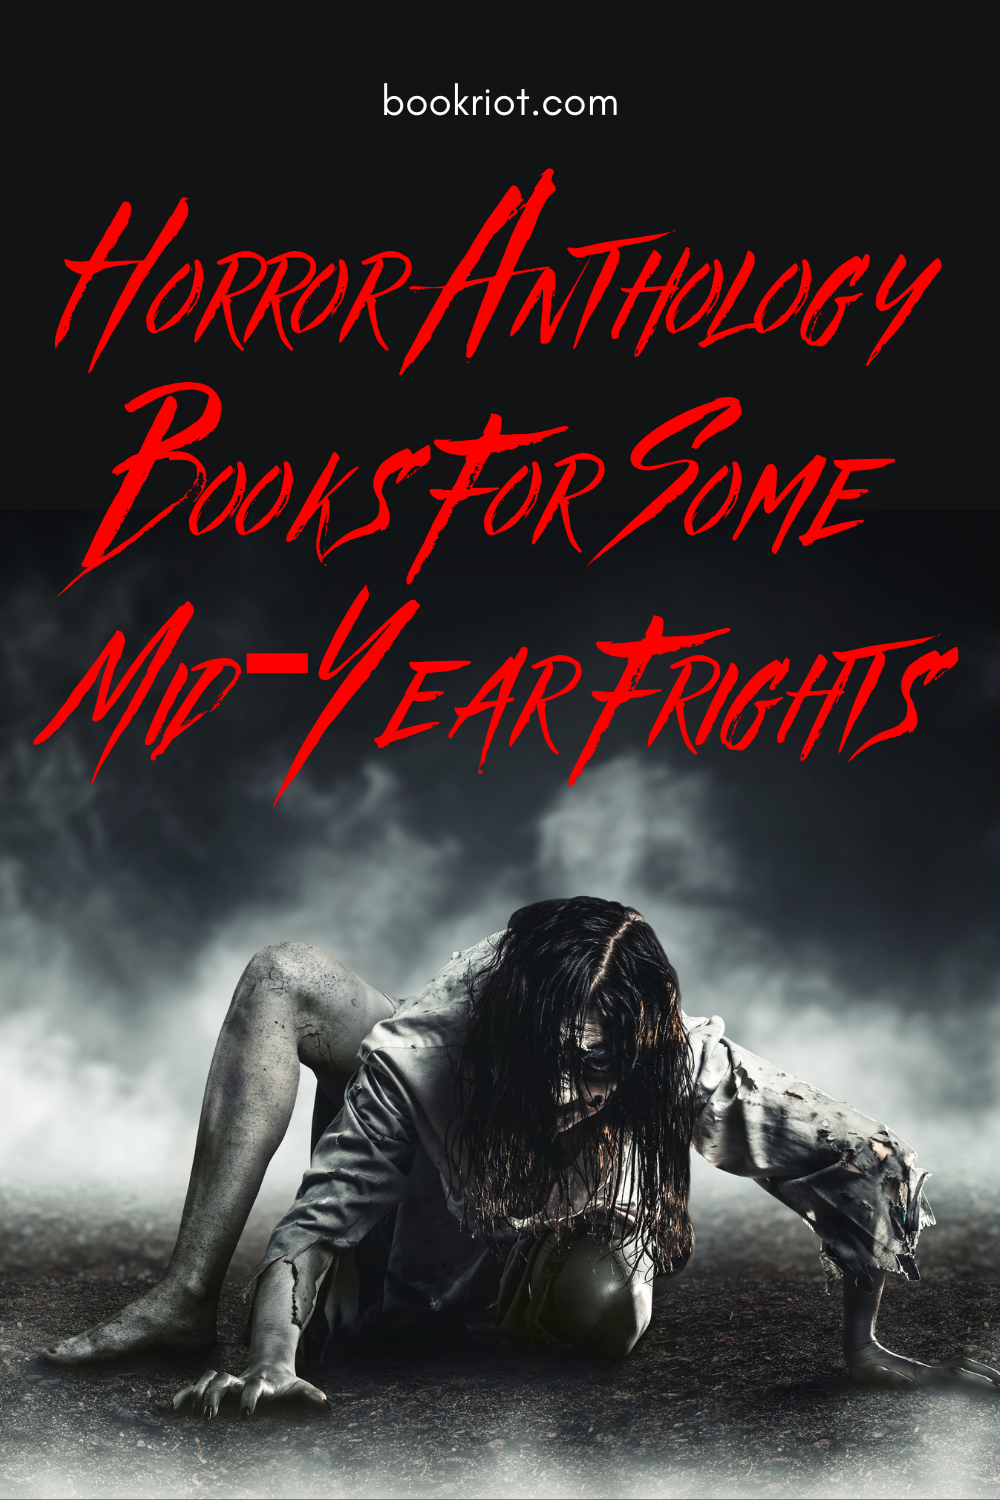 Horror Anthology Books For Some MidYear Frights Book Riot